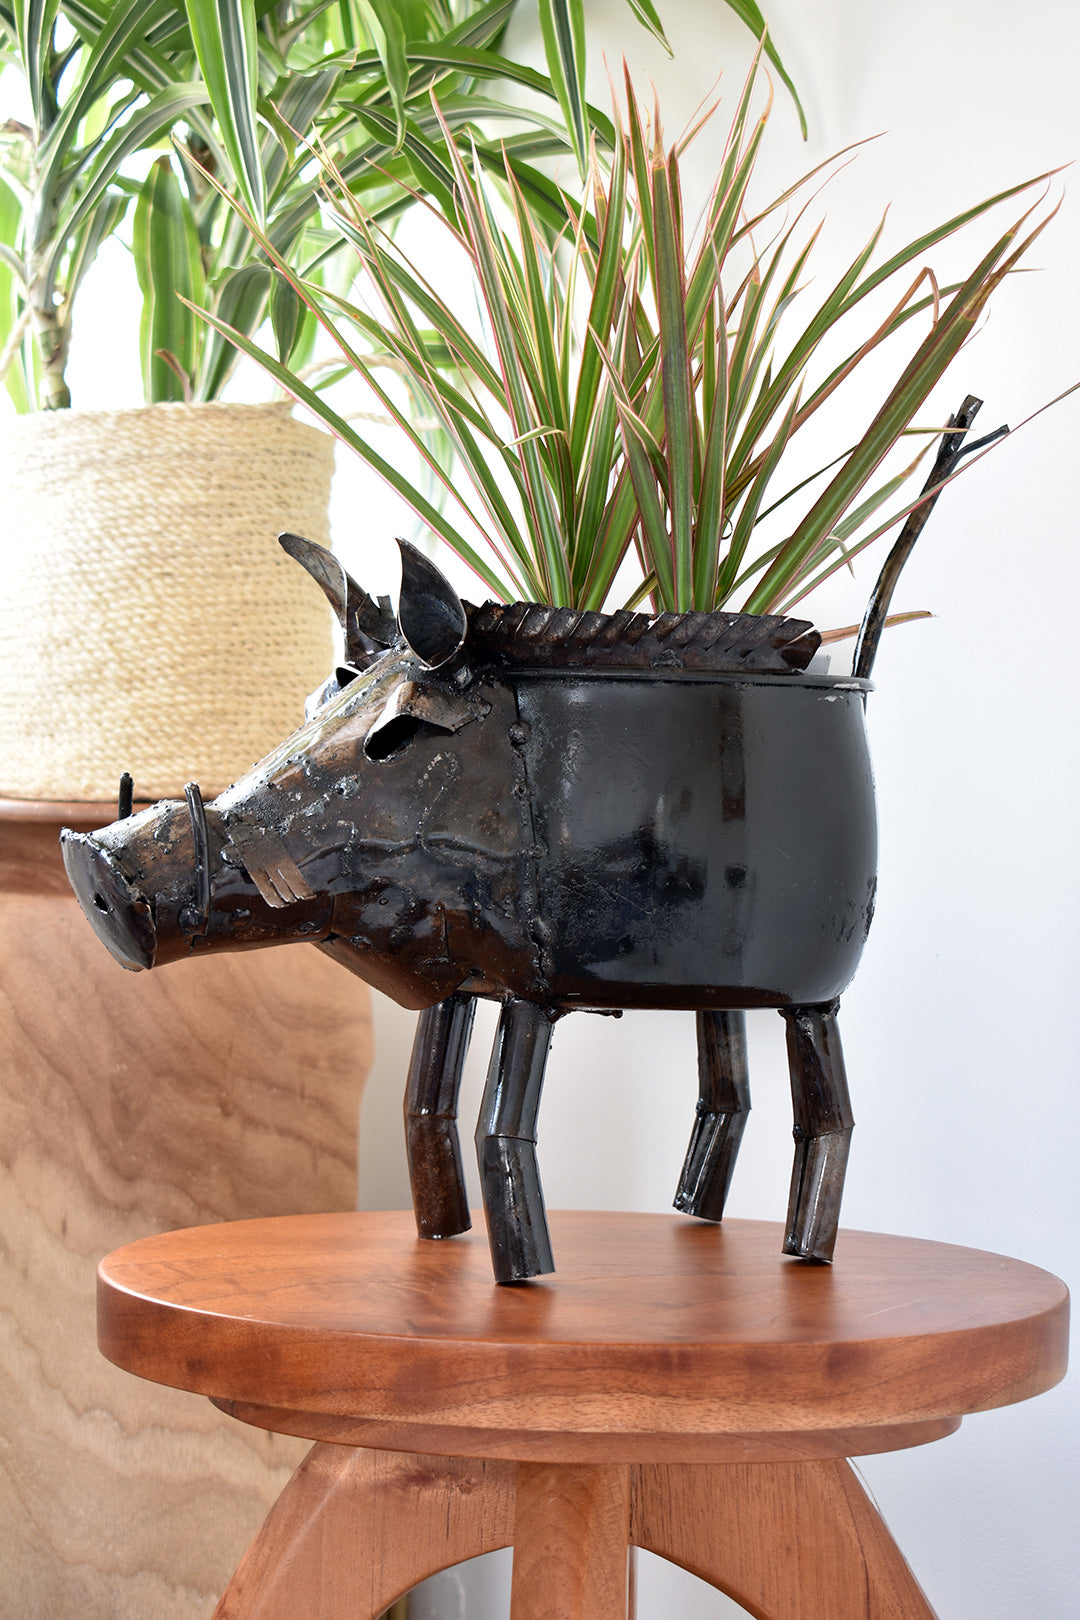 Recycled Cooking Pot Warthog Planters SOLD OUT Small Recycled Cooking Pot Warthog Planter